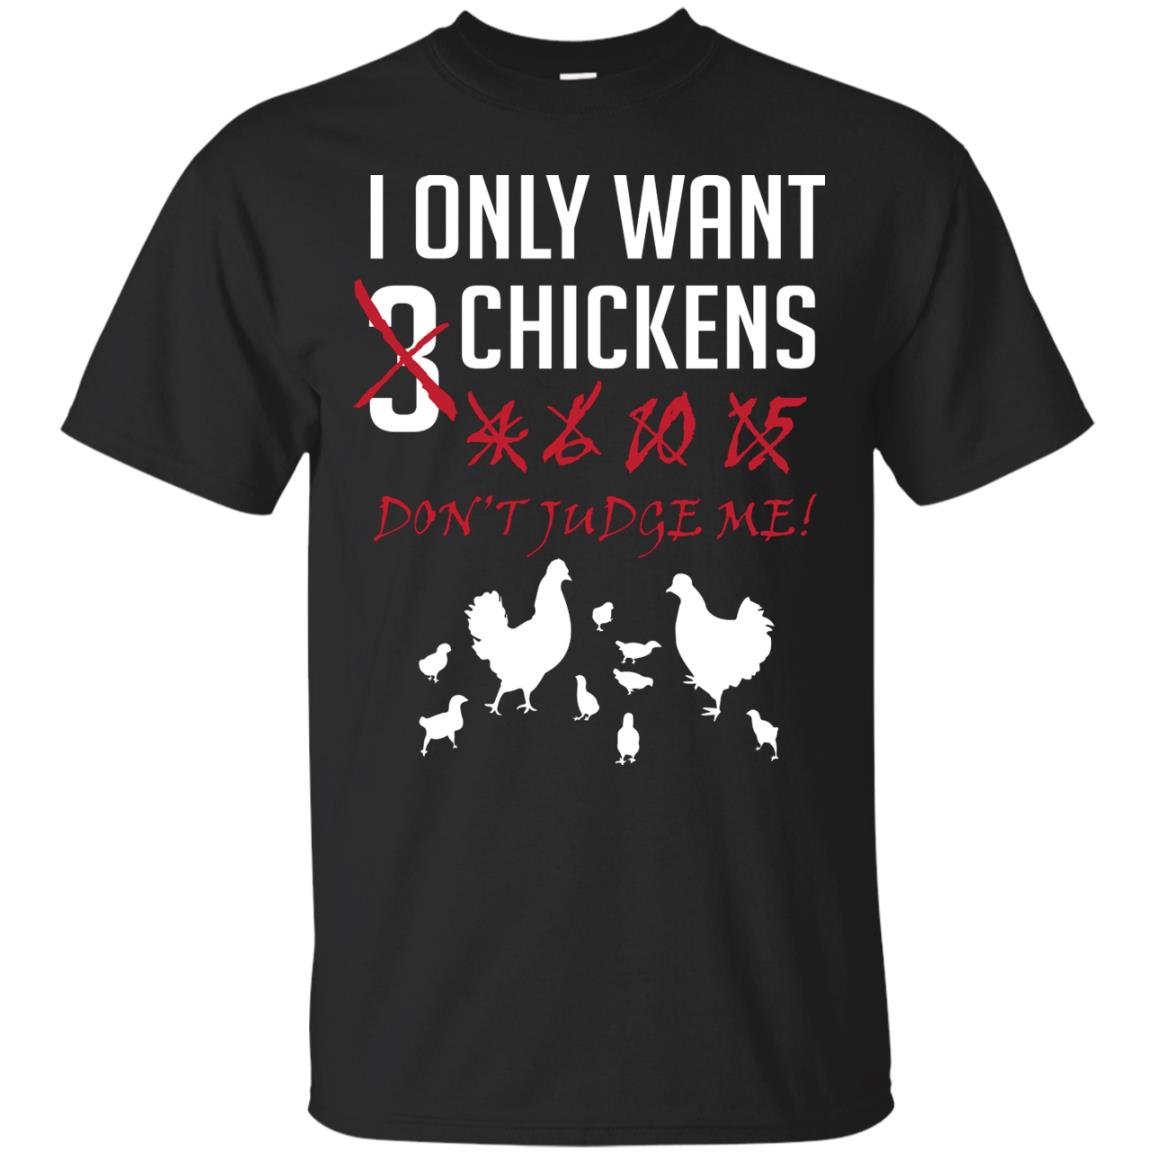 I Only Want 3 Chickens Chicken Gift Shirt For Farmer